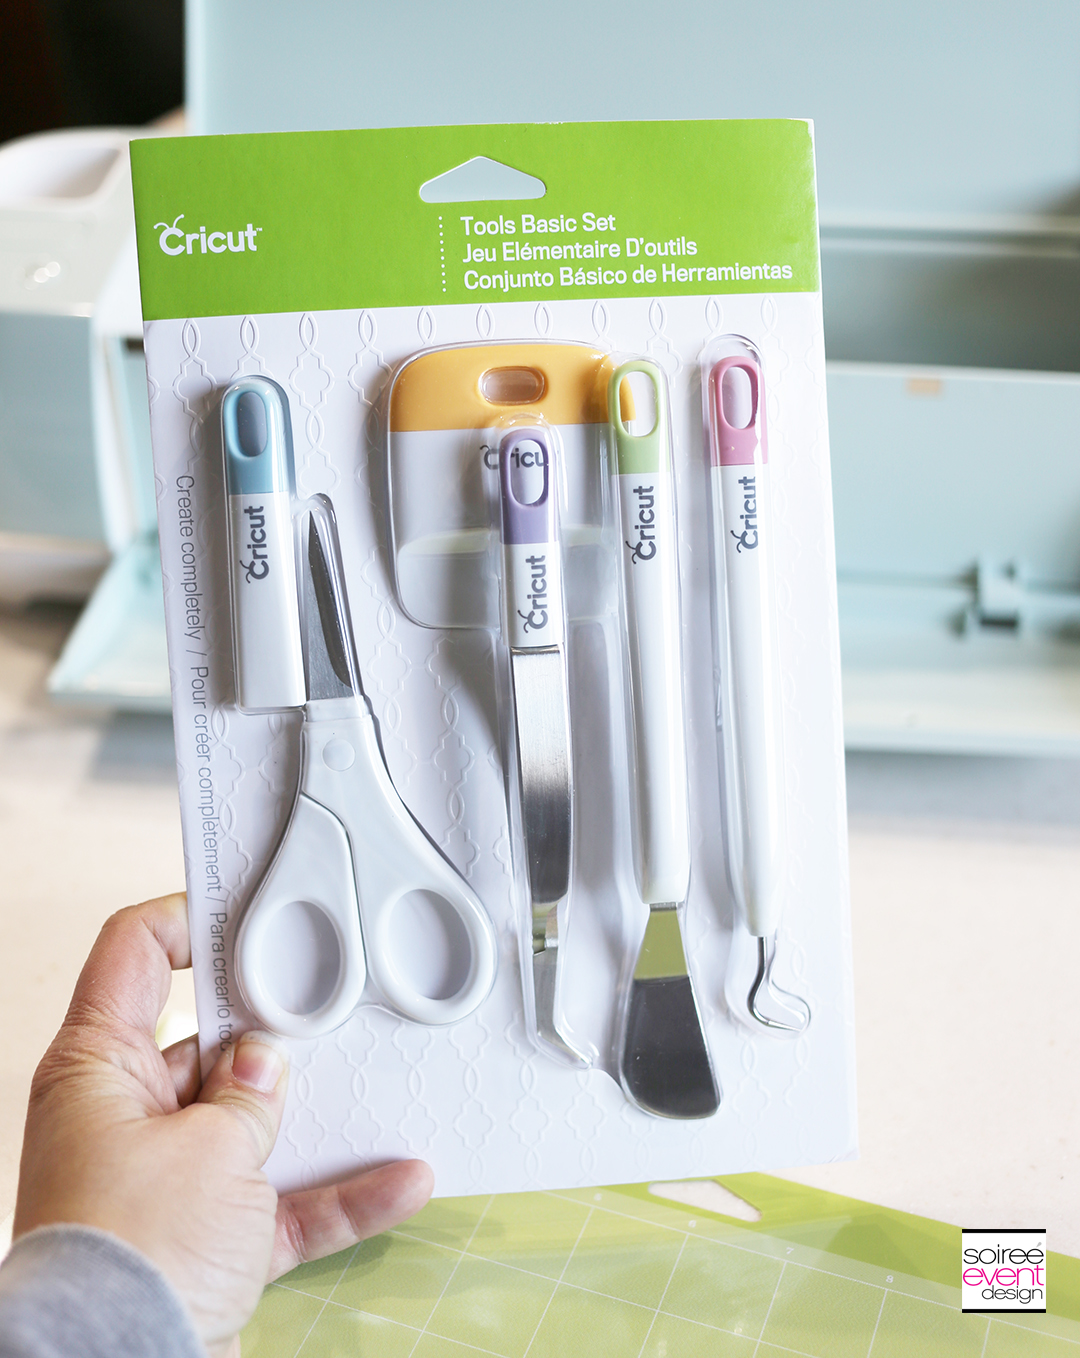 Check out the NEW Cricut Explore Air™ 2 and up your DIY game! - Soiree